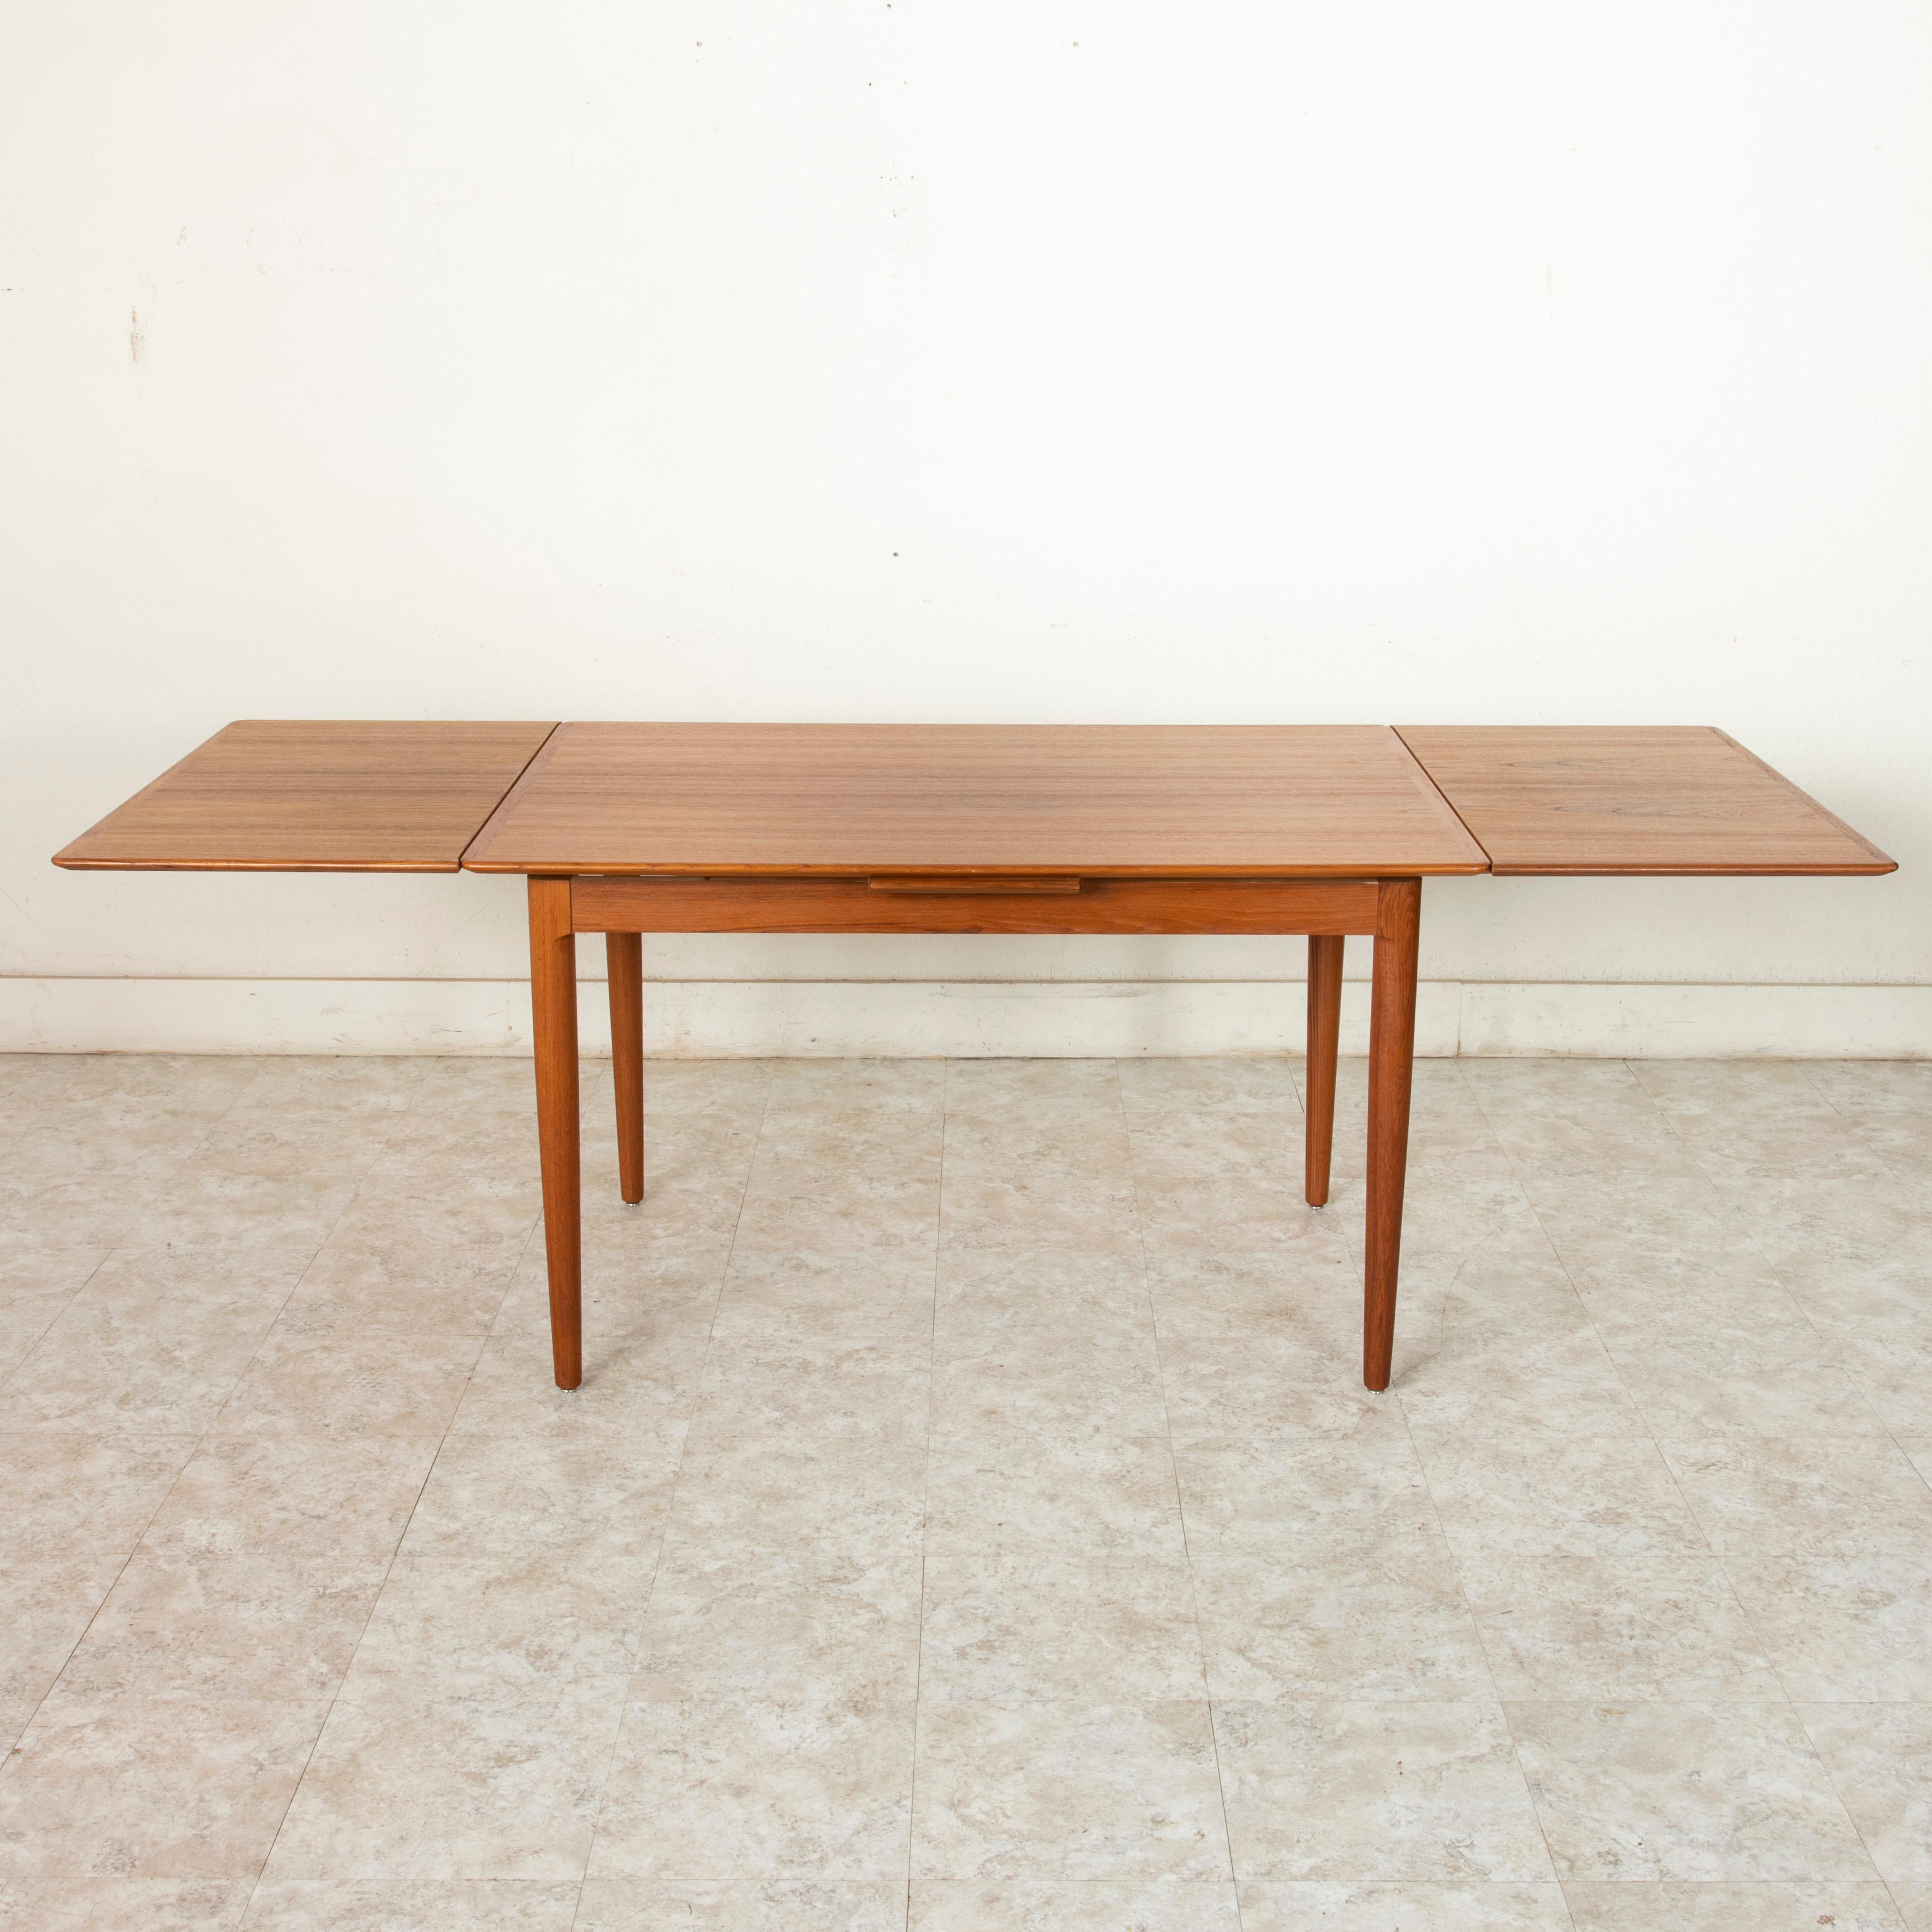 Midcentury Danish Modern Teak Dining Table with Draw Leaves 1